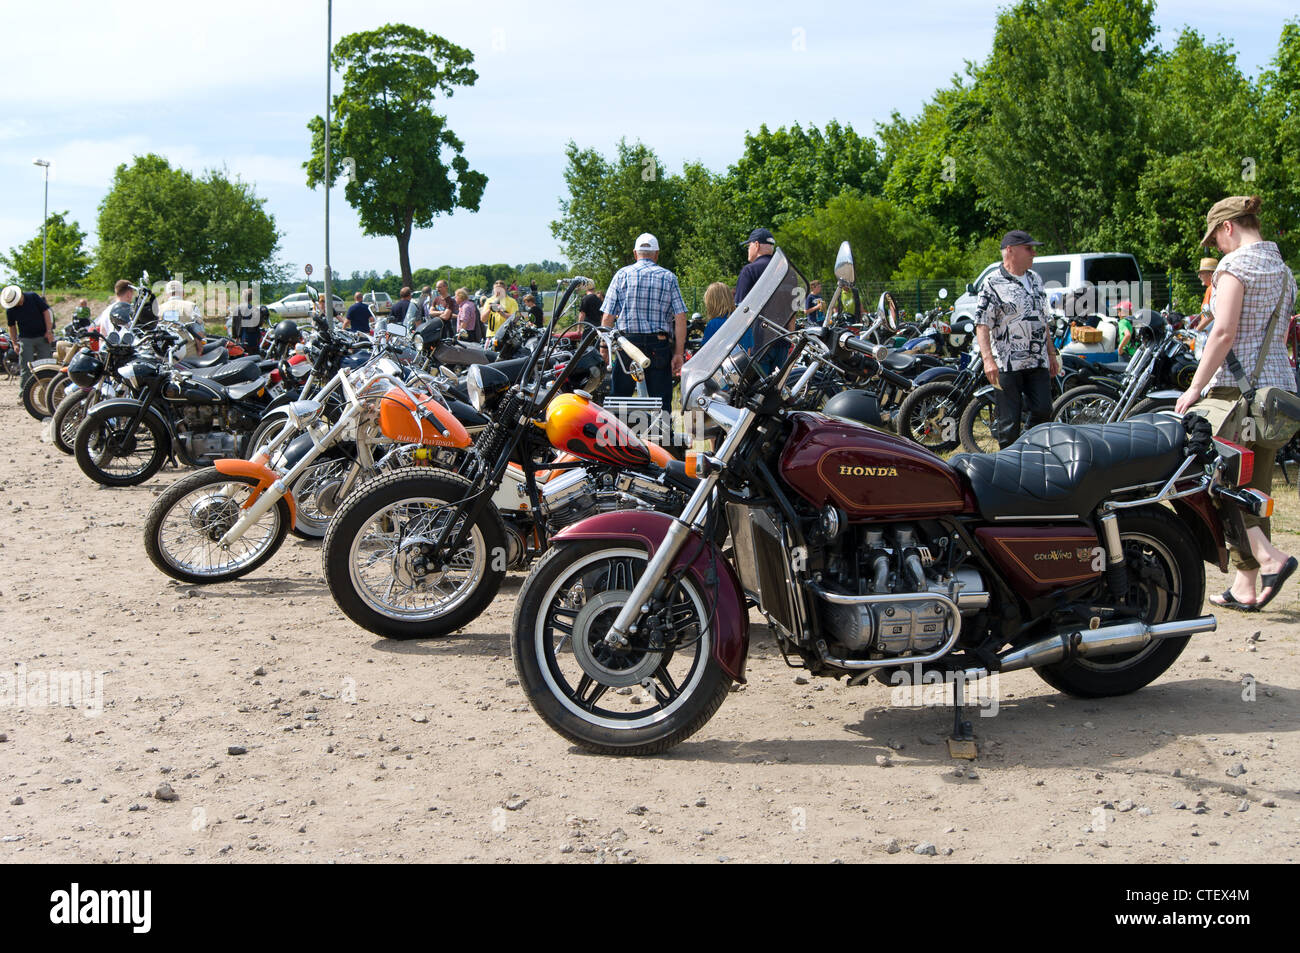 Various motorcycles Harley-Davidson and Honda Gold Wing GL 1100 in the foreground Stock Photo